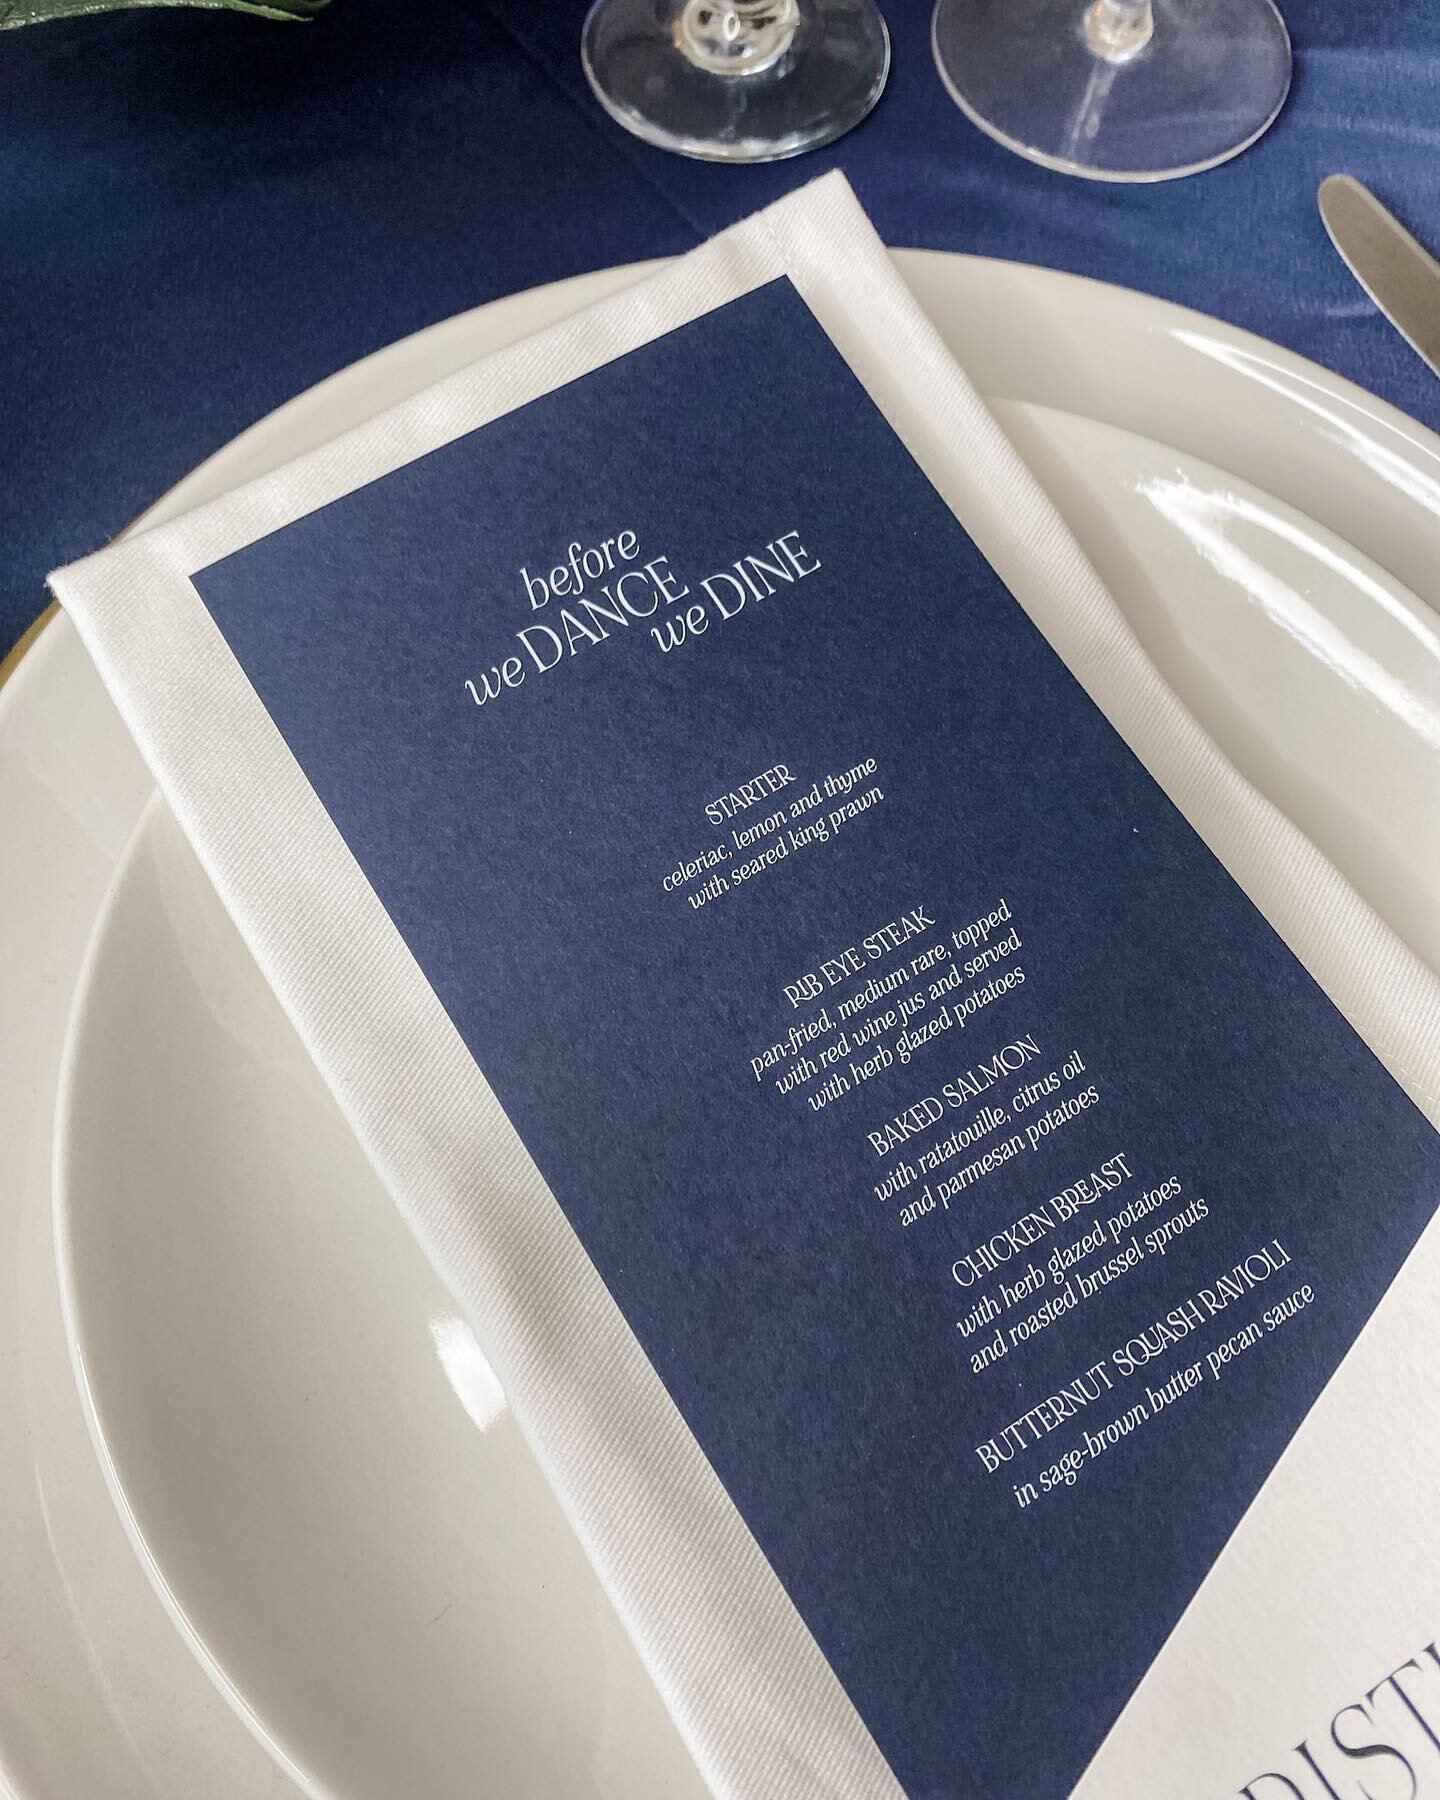 Before we 💃🏻DANCE 🪩 we DINE! 🍽️ Sounds good to us!

The Suite Design Co. does more than invitations&hellip; check out our page and find the right prints for you! #thesuitedesignco 

&mdash;
#dmvweddings #dmvbridal #dmvbrides #dmvbridestobe #njbri